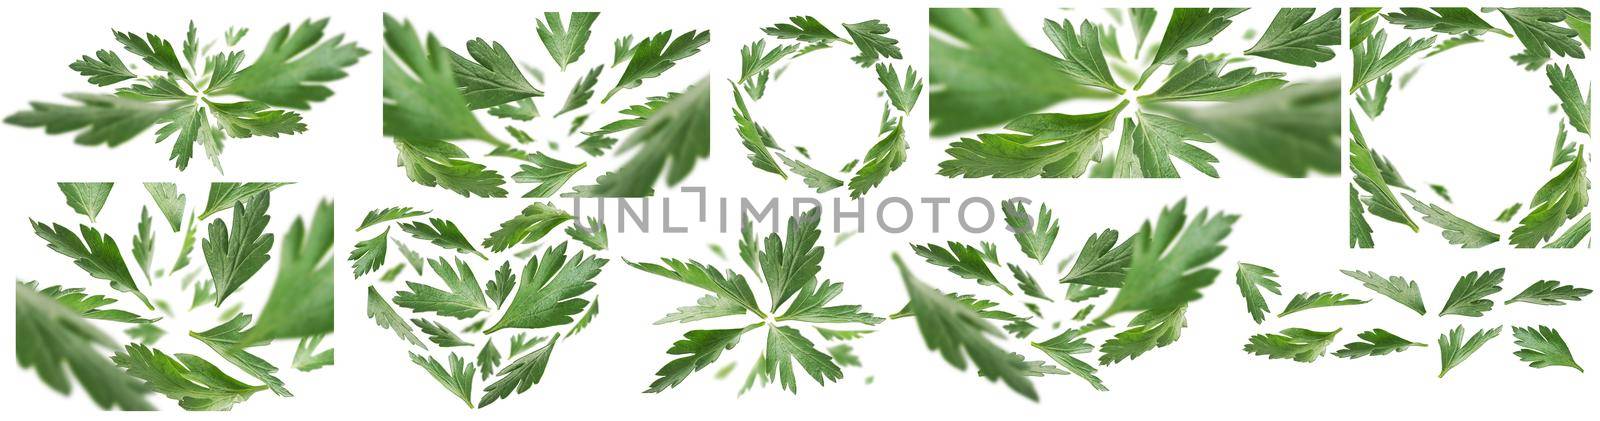 A set of photos. Green parsley leaves levitate on a white background.